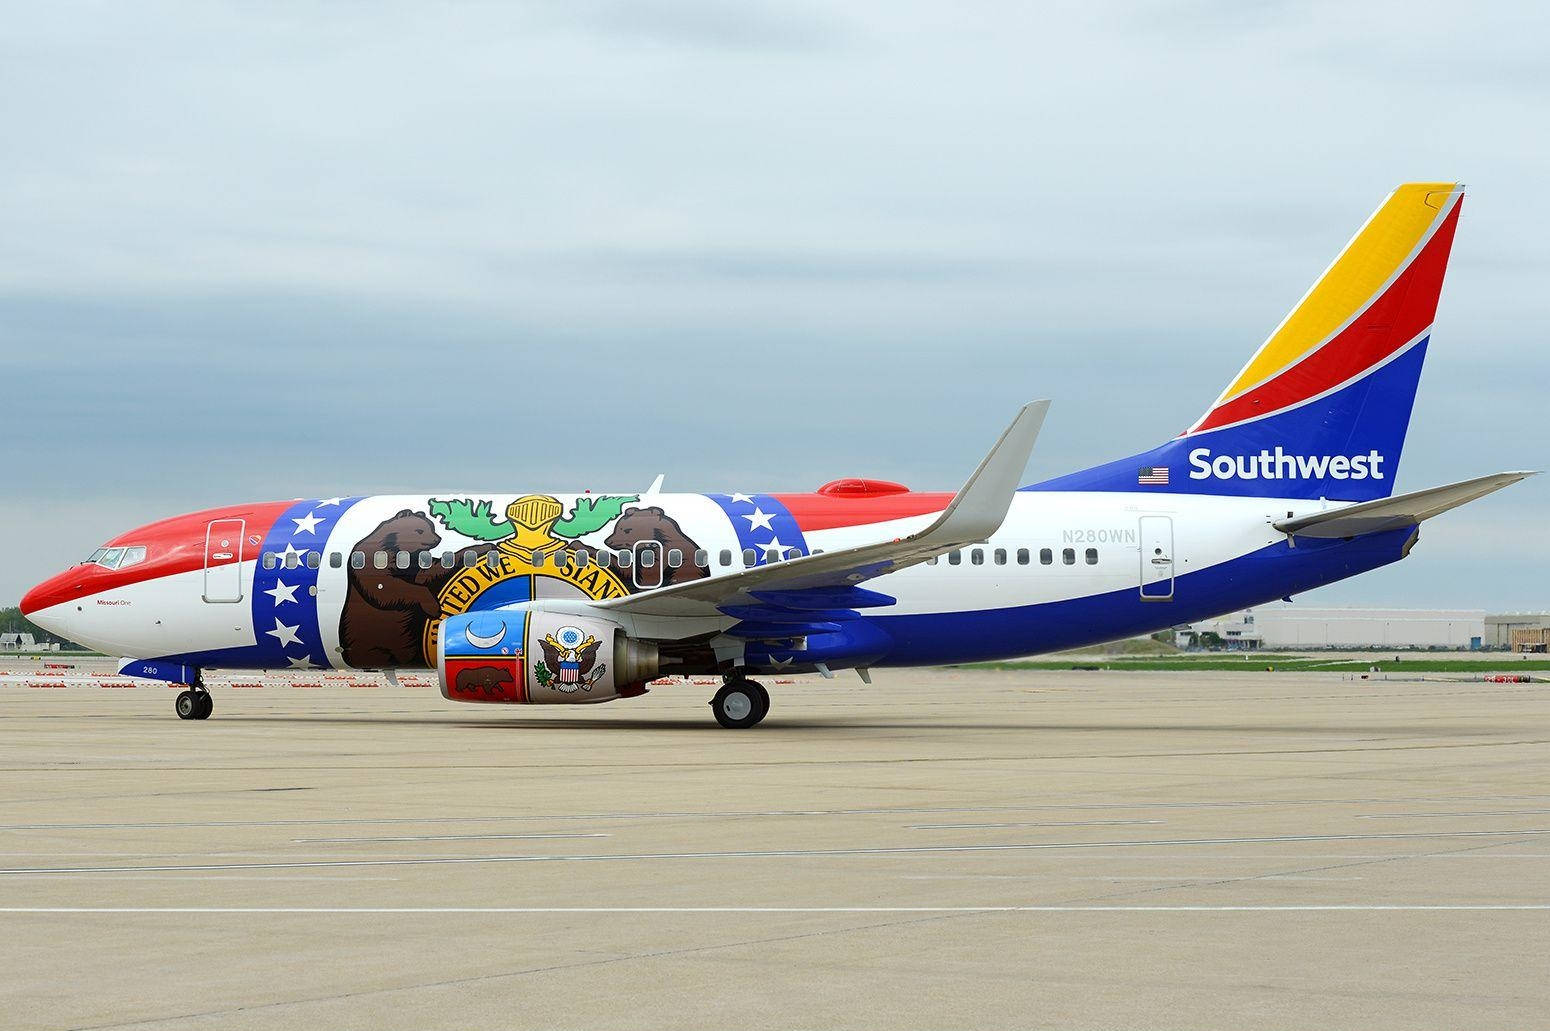 Southwest Airlines Airplane Mural Wallpaper